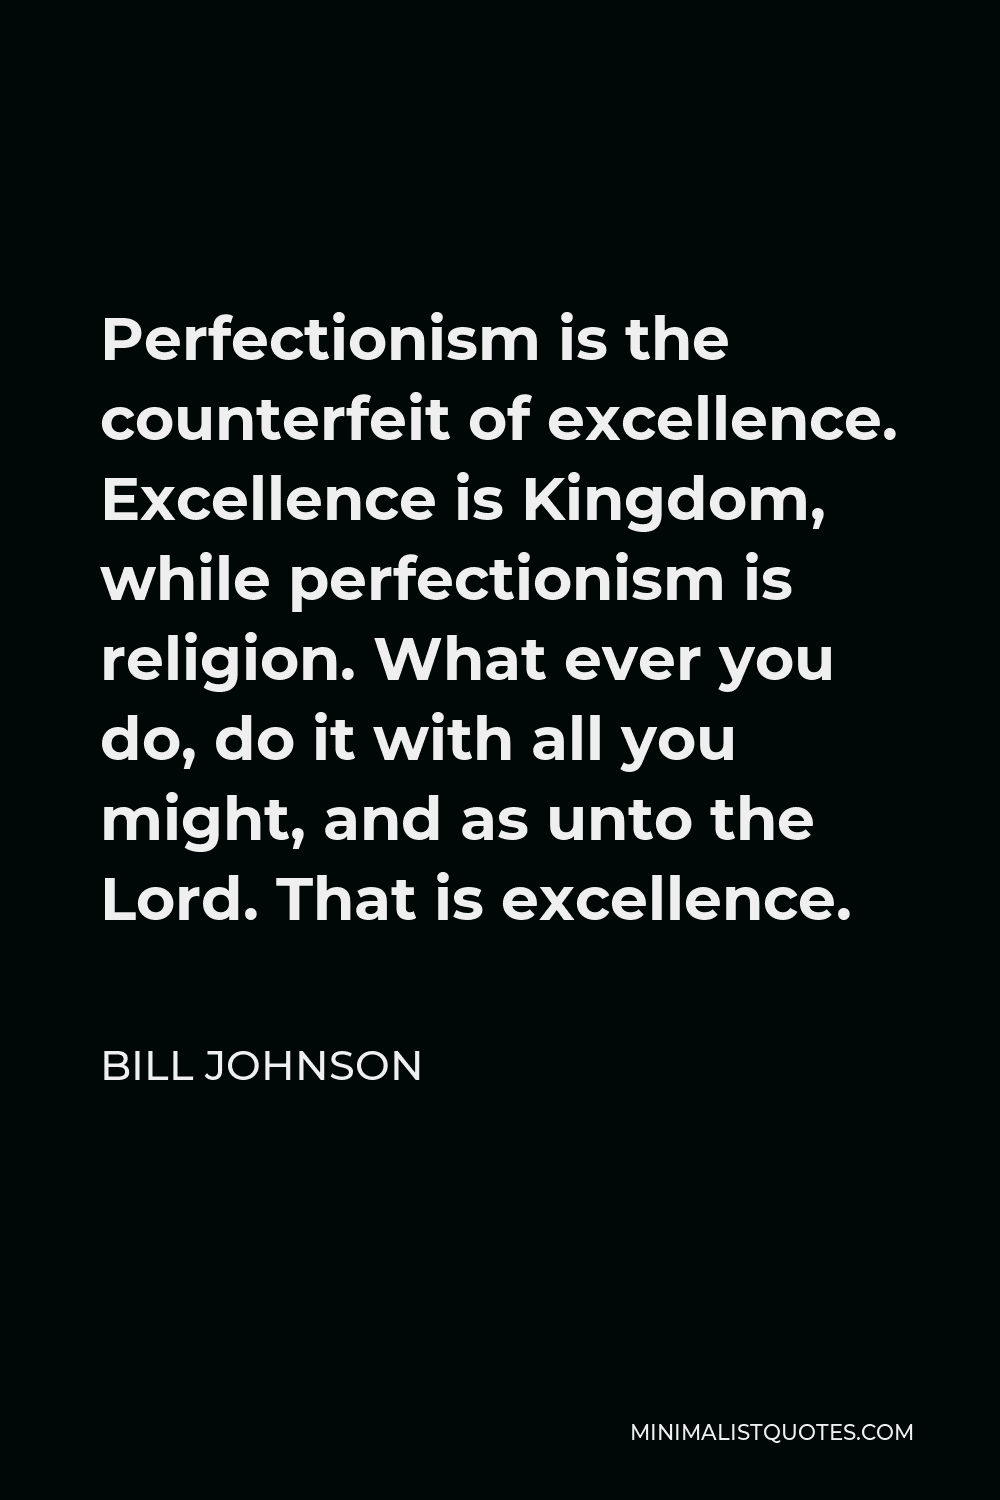 Bill Johnson Quote - Perfectionism is the counterfeit of excellence. Excellence is Kingdom, while perfectionism is religion. What ever you do, do it with all you might, and as unto the Lord. That is excellence.